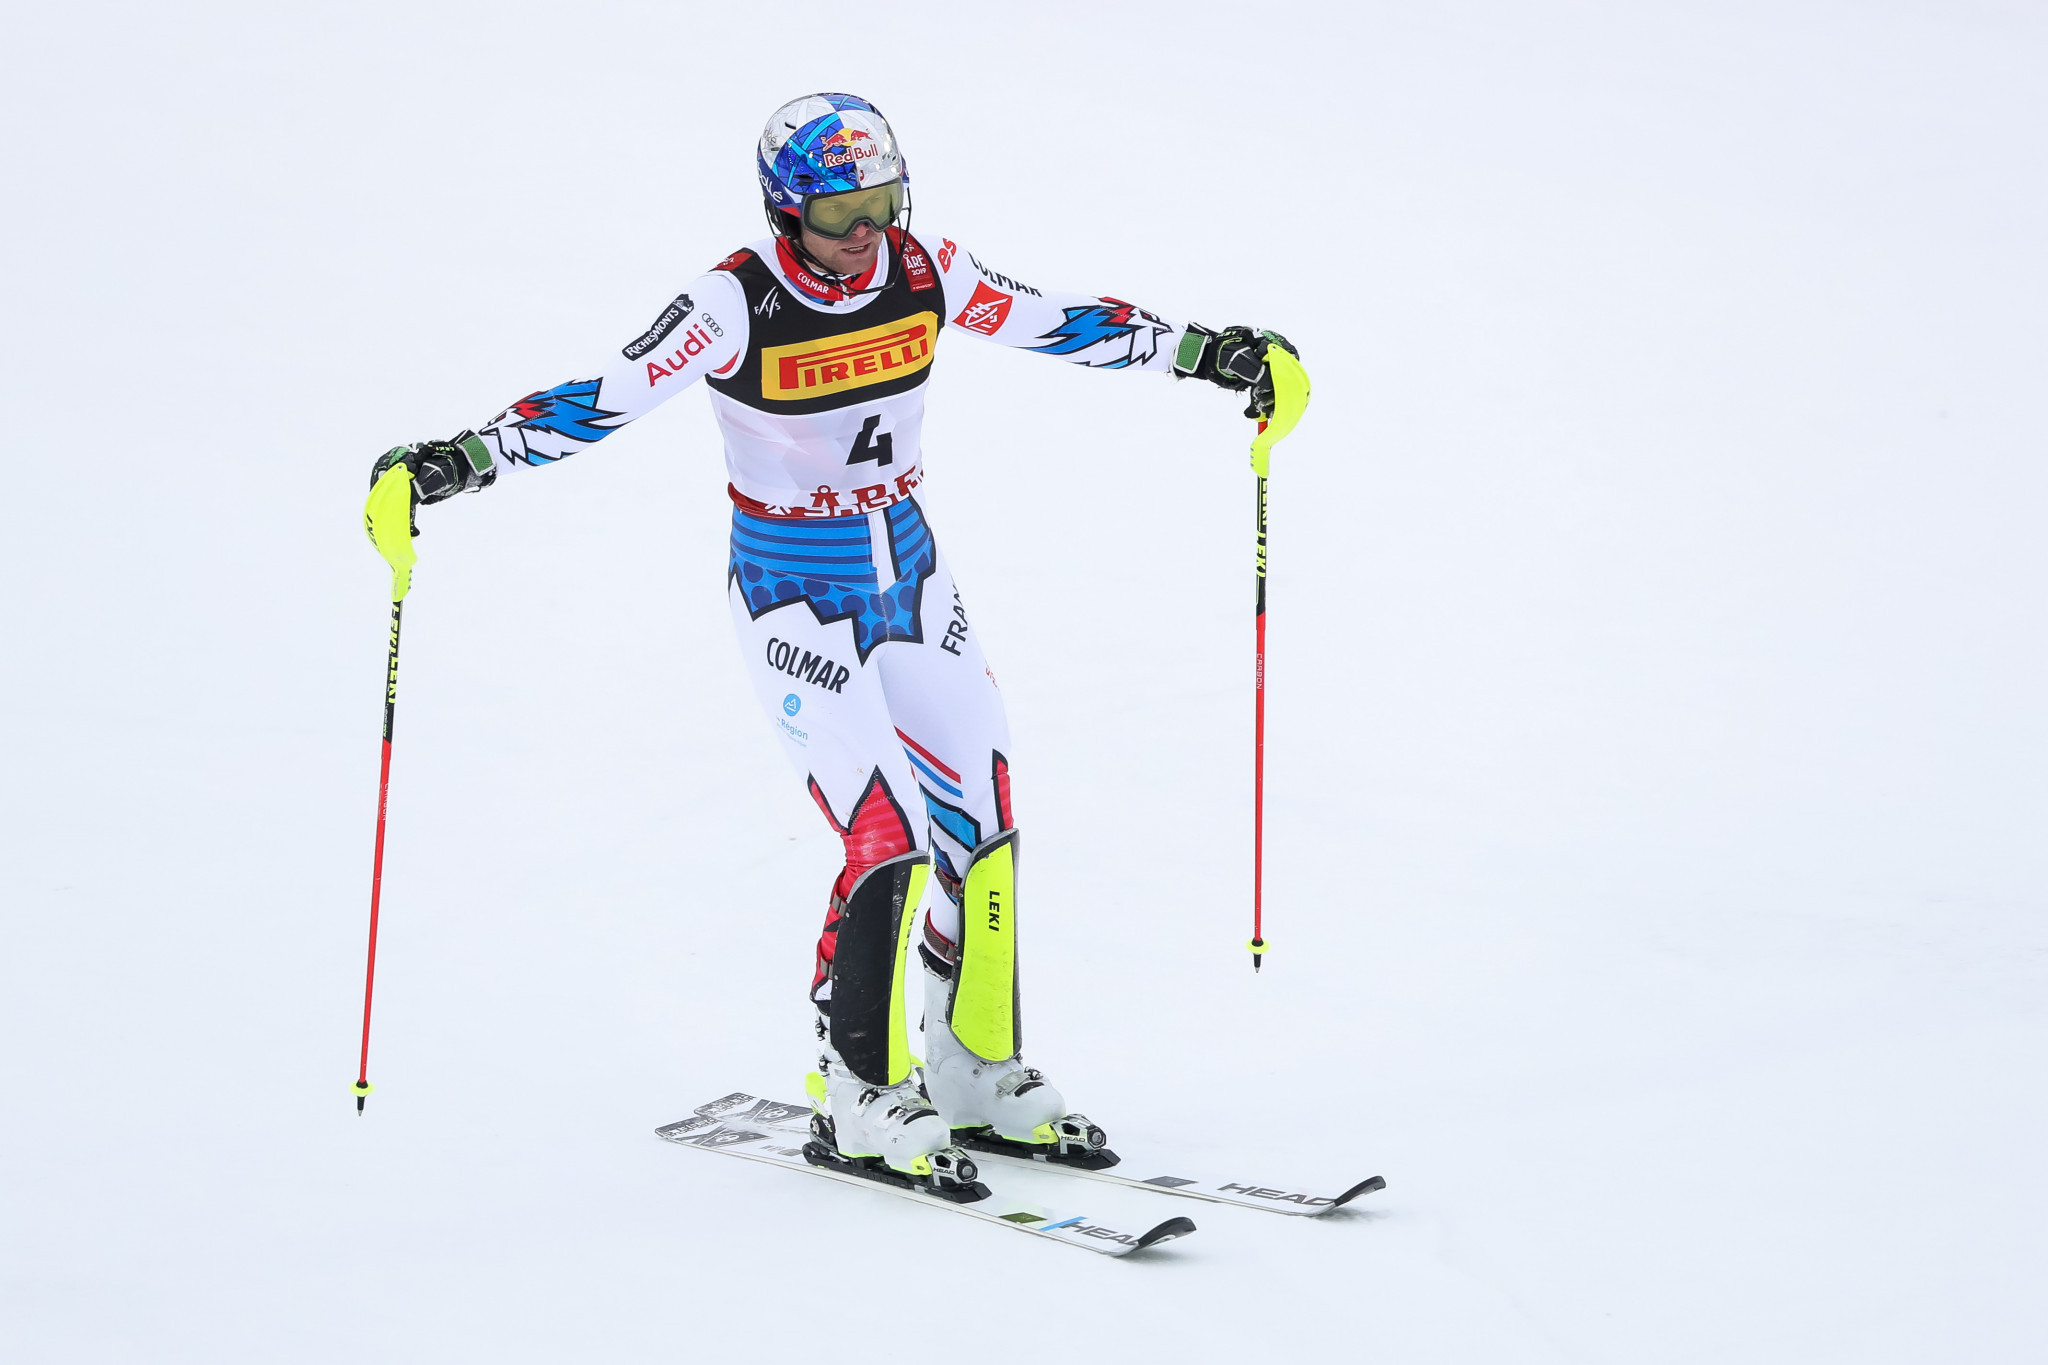 New world champion Pinturault to star in Alpine combined at FIS Alpine Skiing World Cup in Bansko